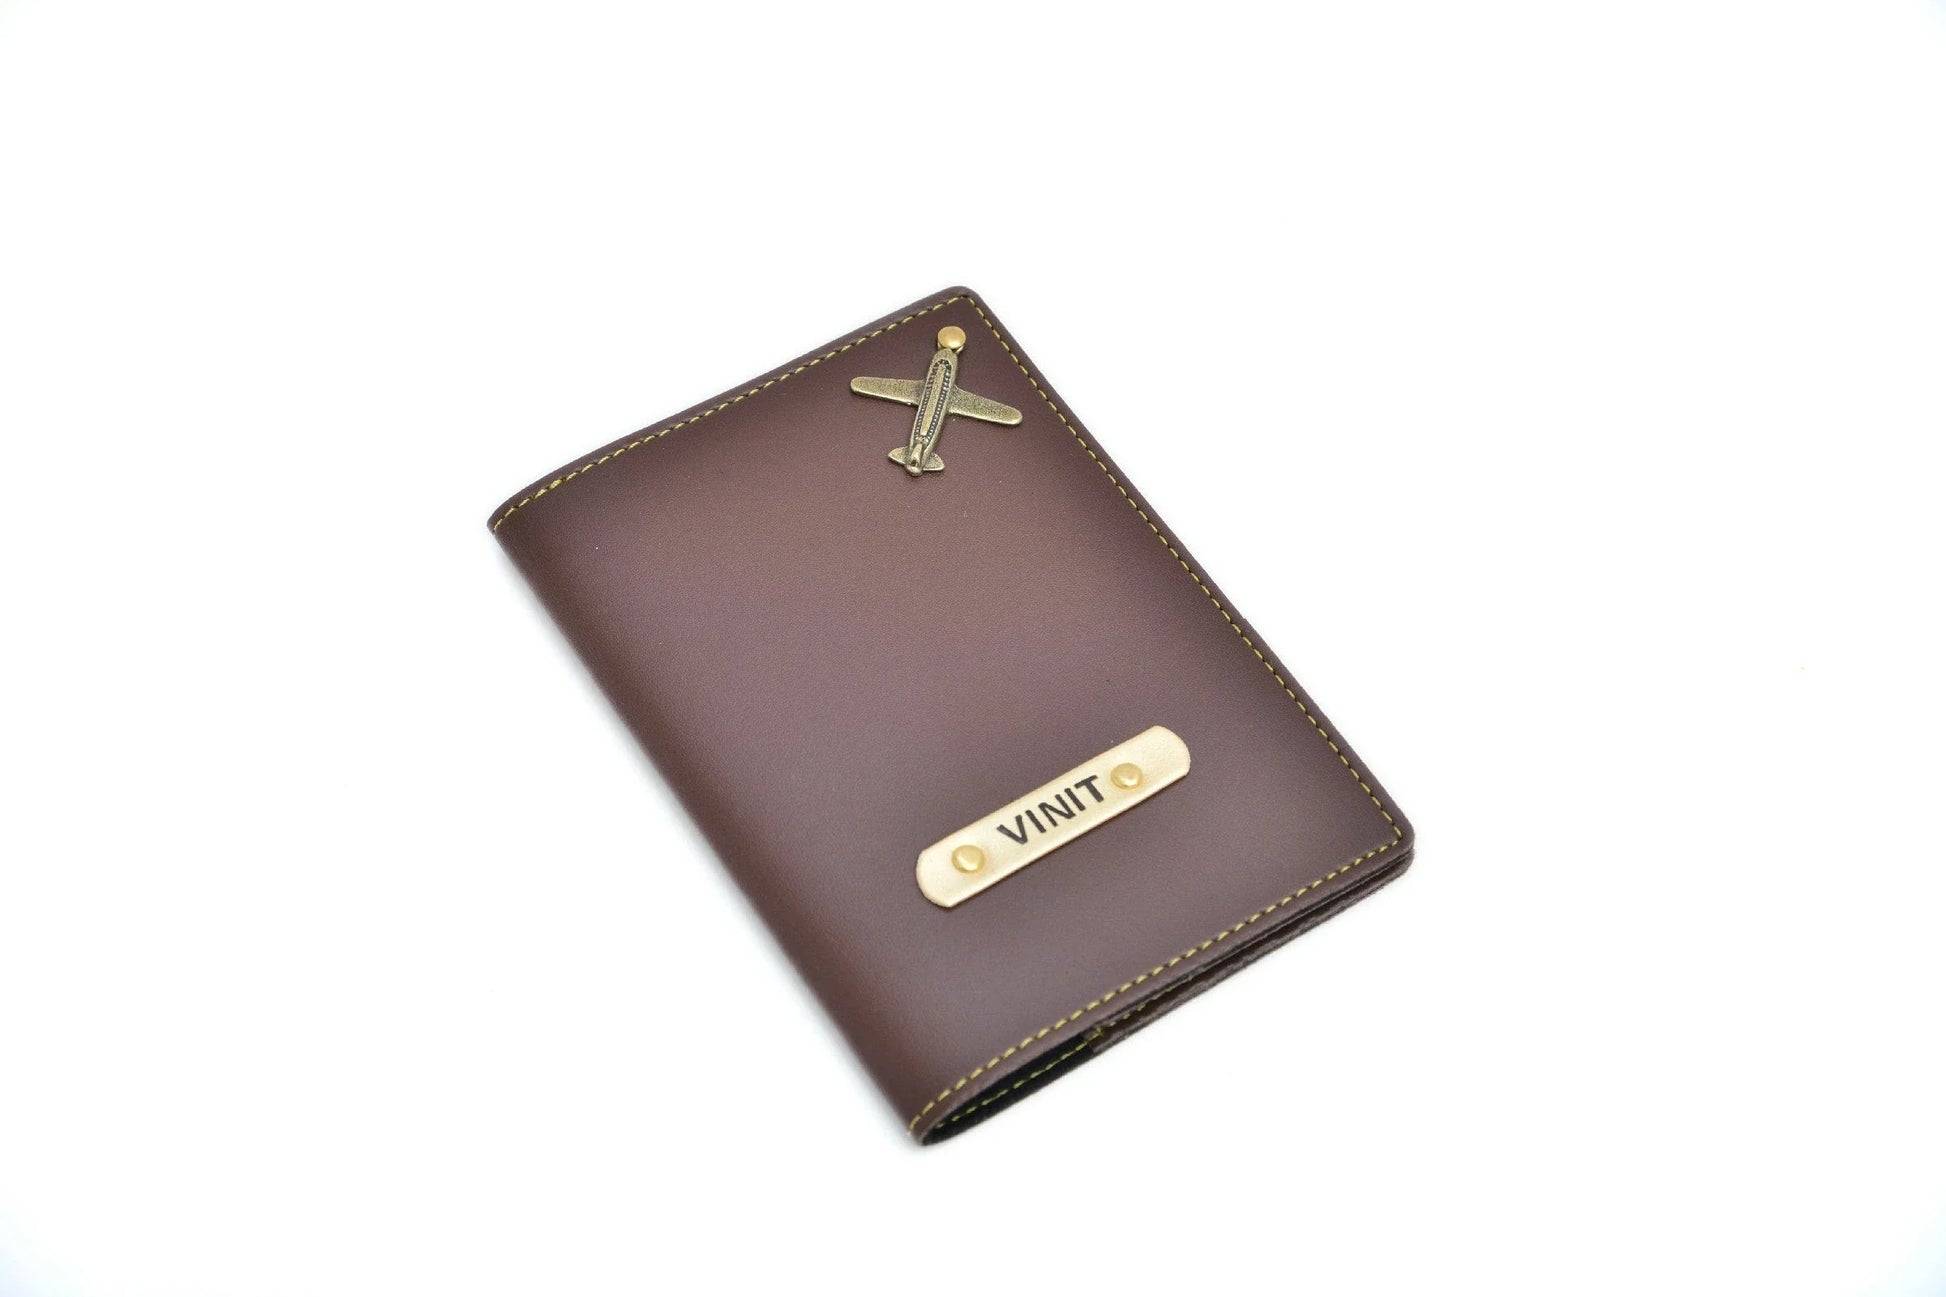 The case with its sturdy build ensures protection of your passport during traveling shenanigans! It carries your passport, money, cards etc. at one place.